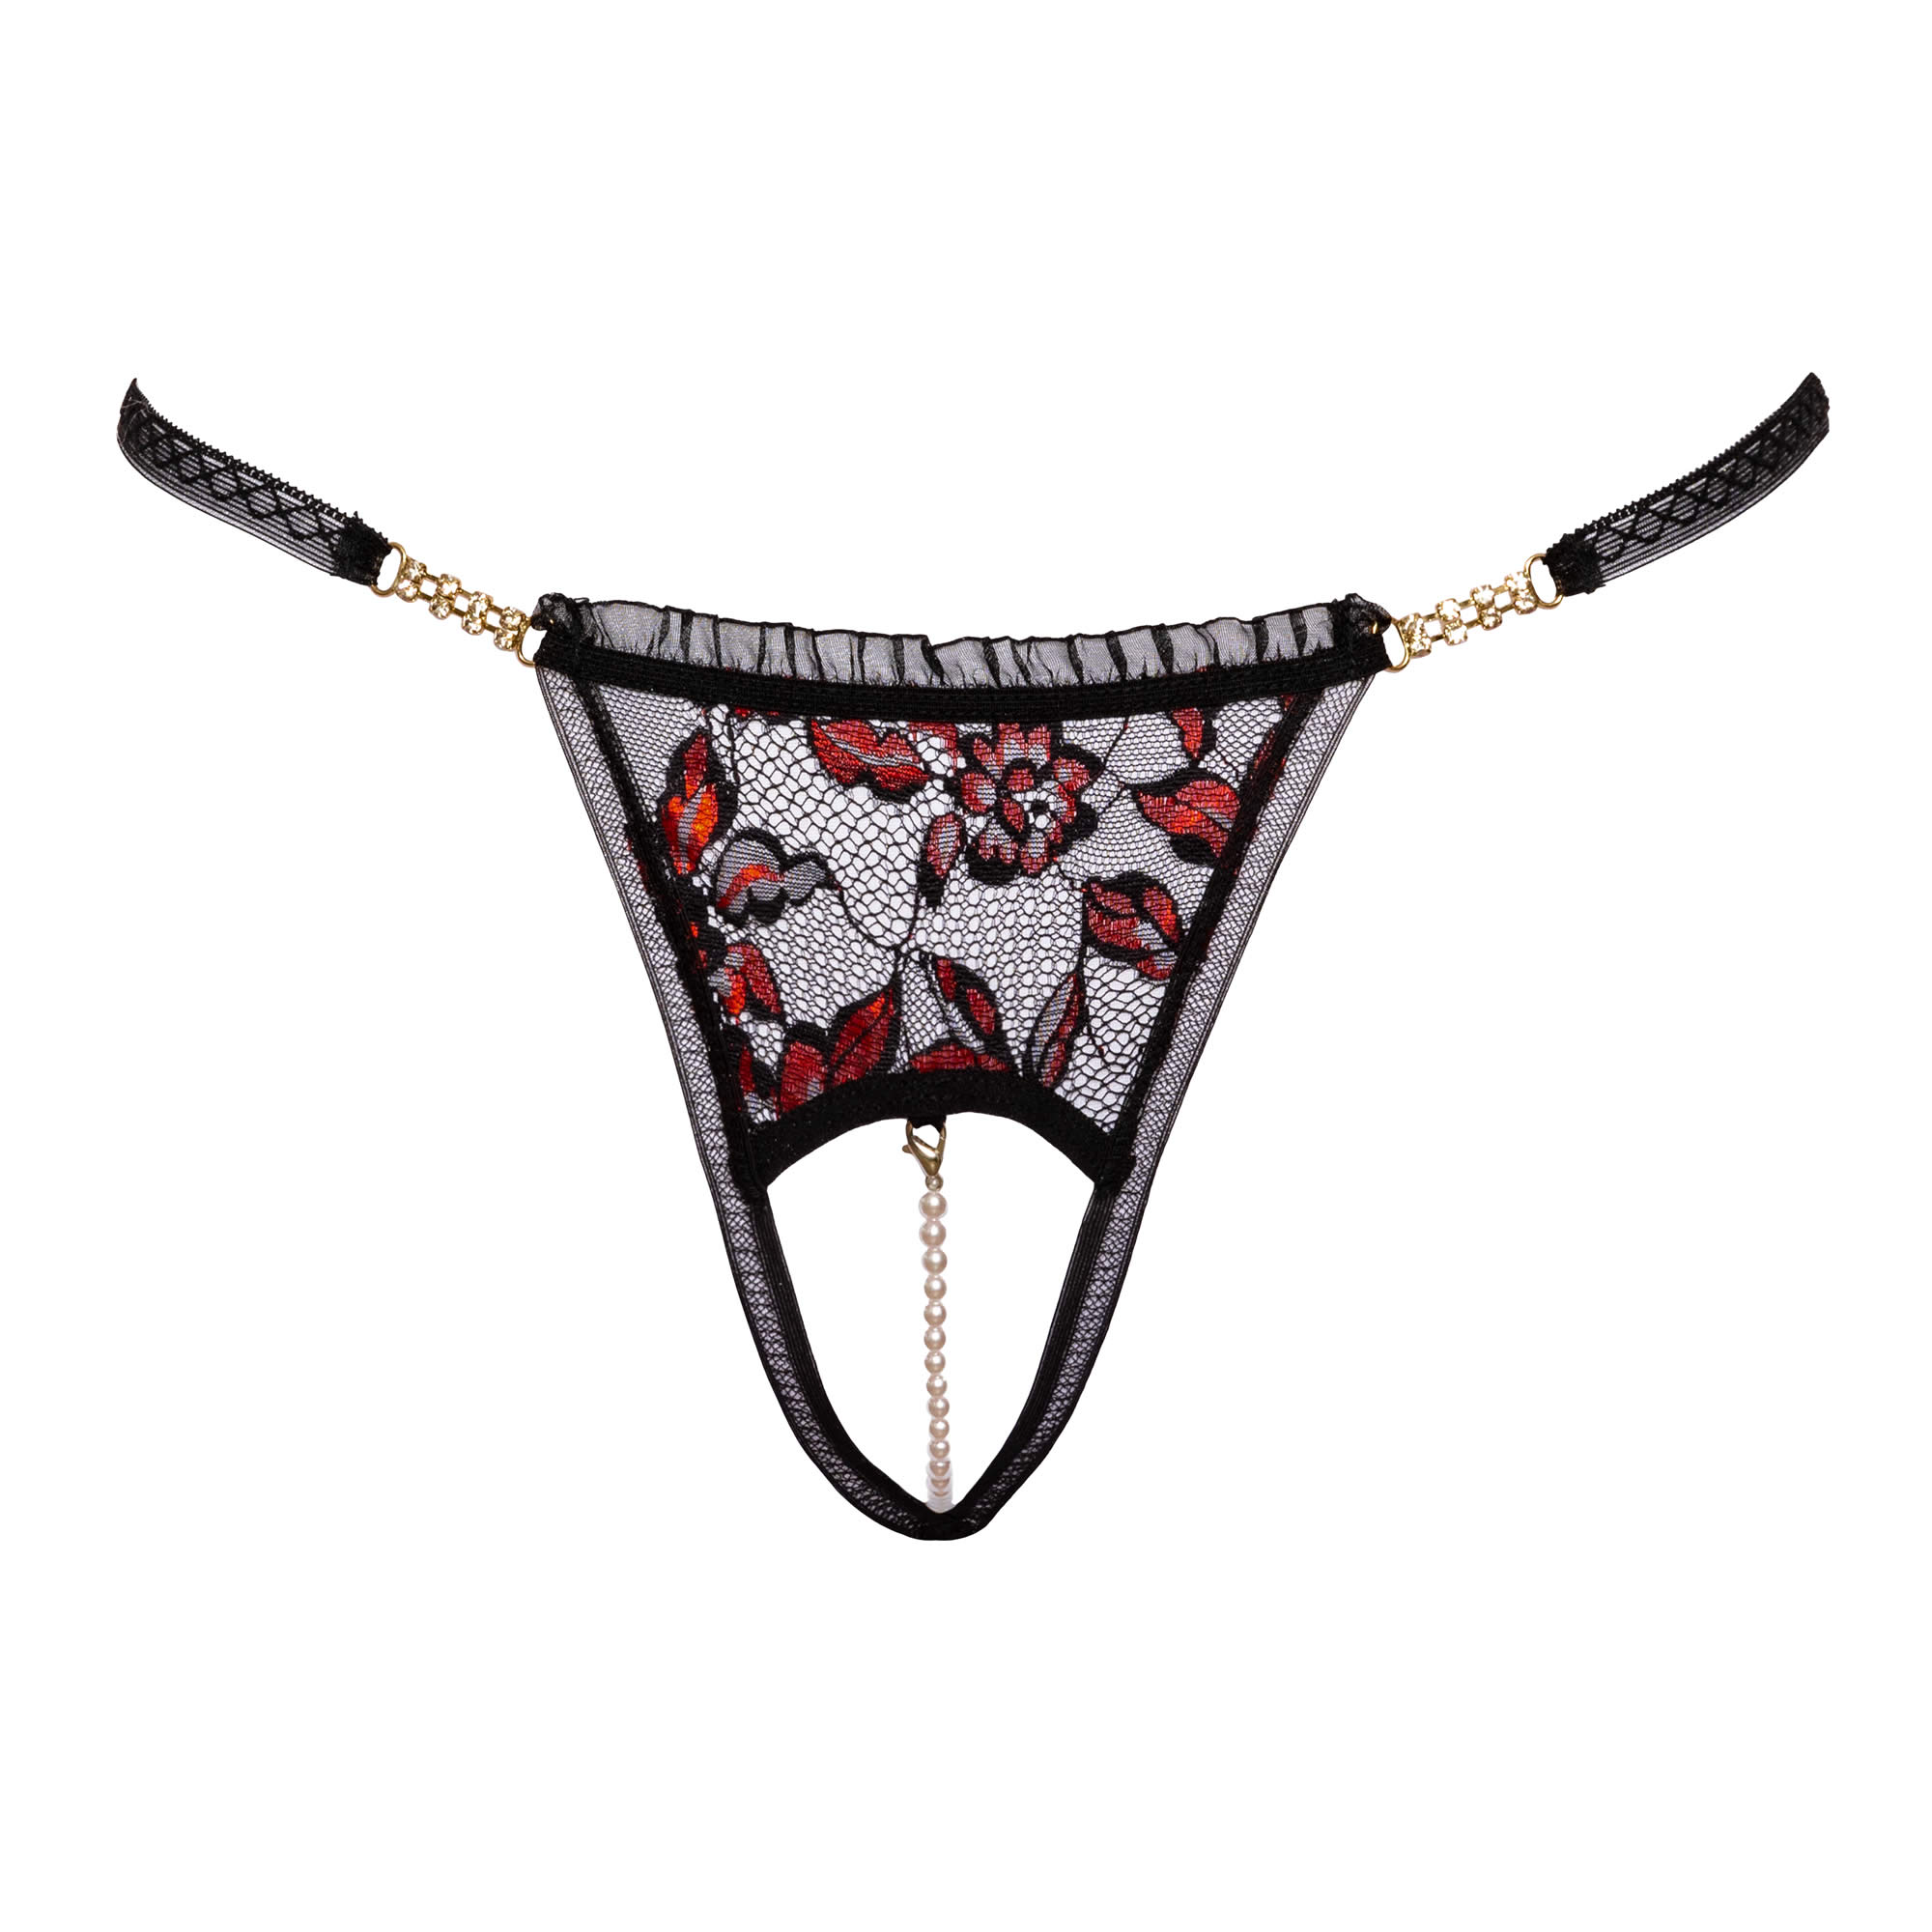 Pearl Thong in red and black lace with rhinestones